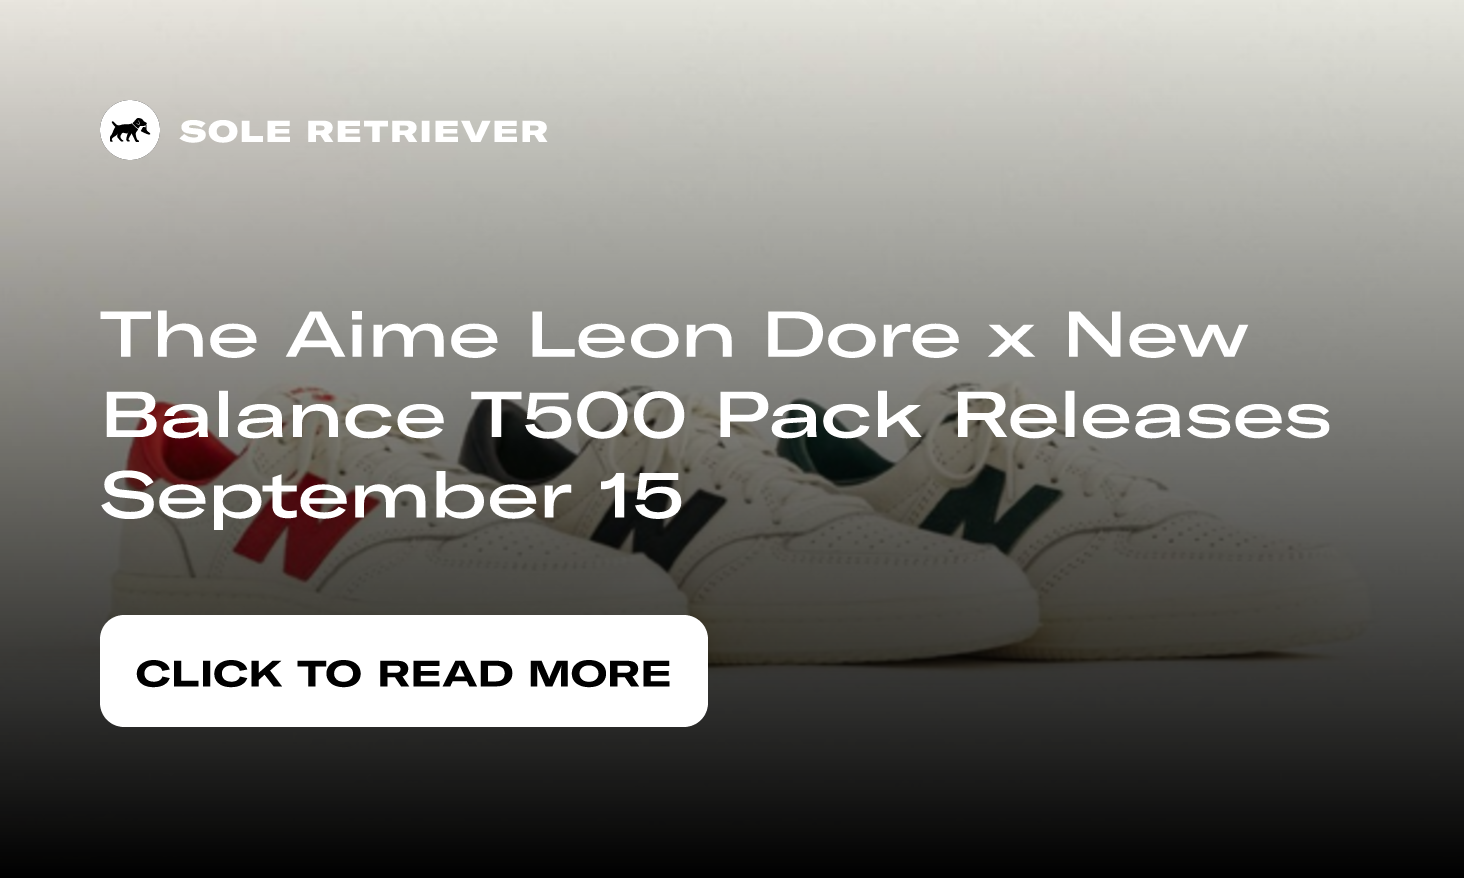 Aime Leon Dore and New Balance Are Collaborating on the T500